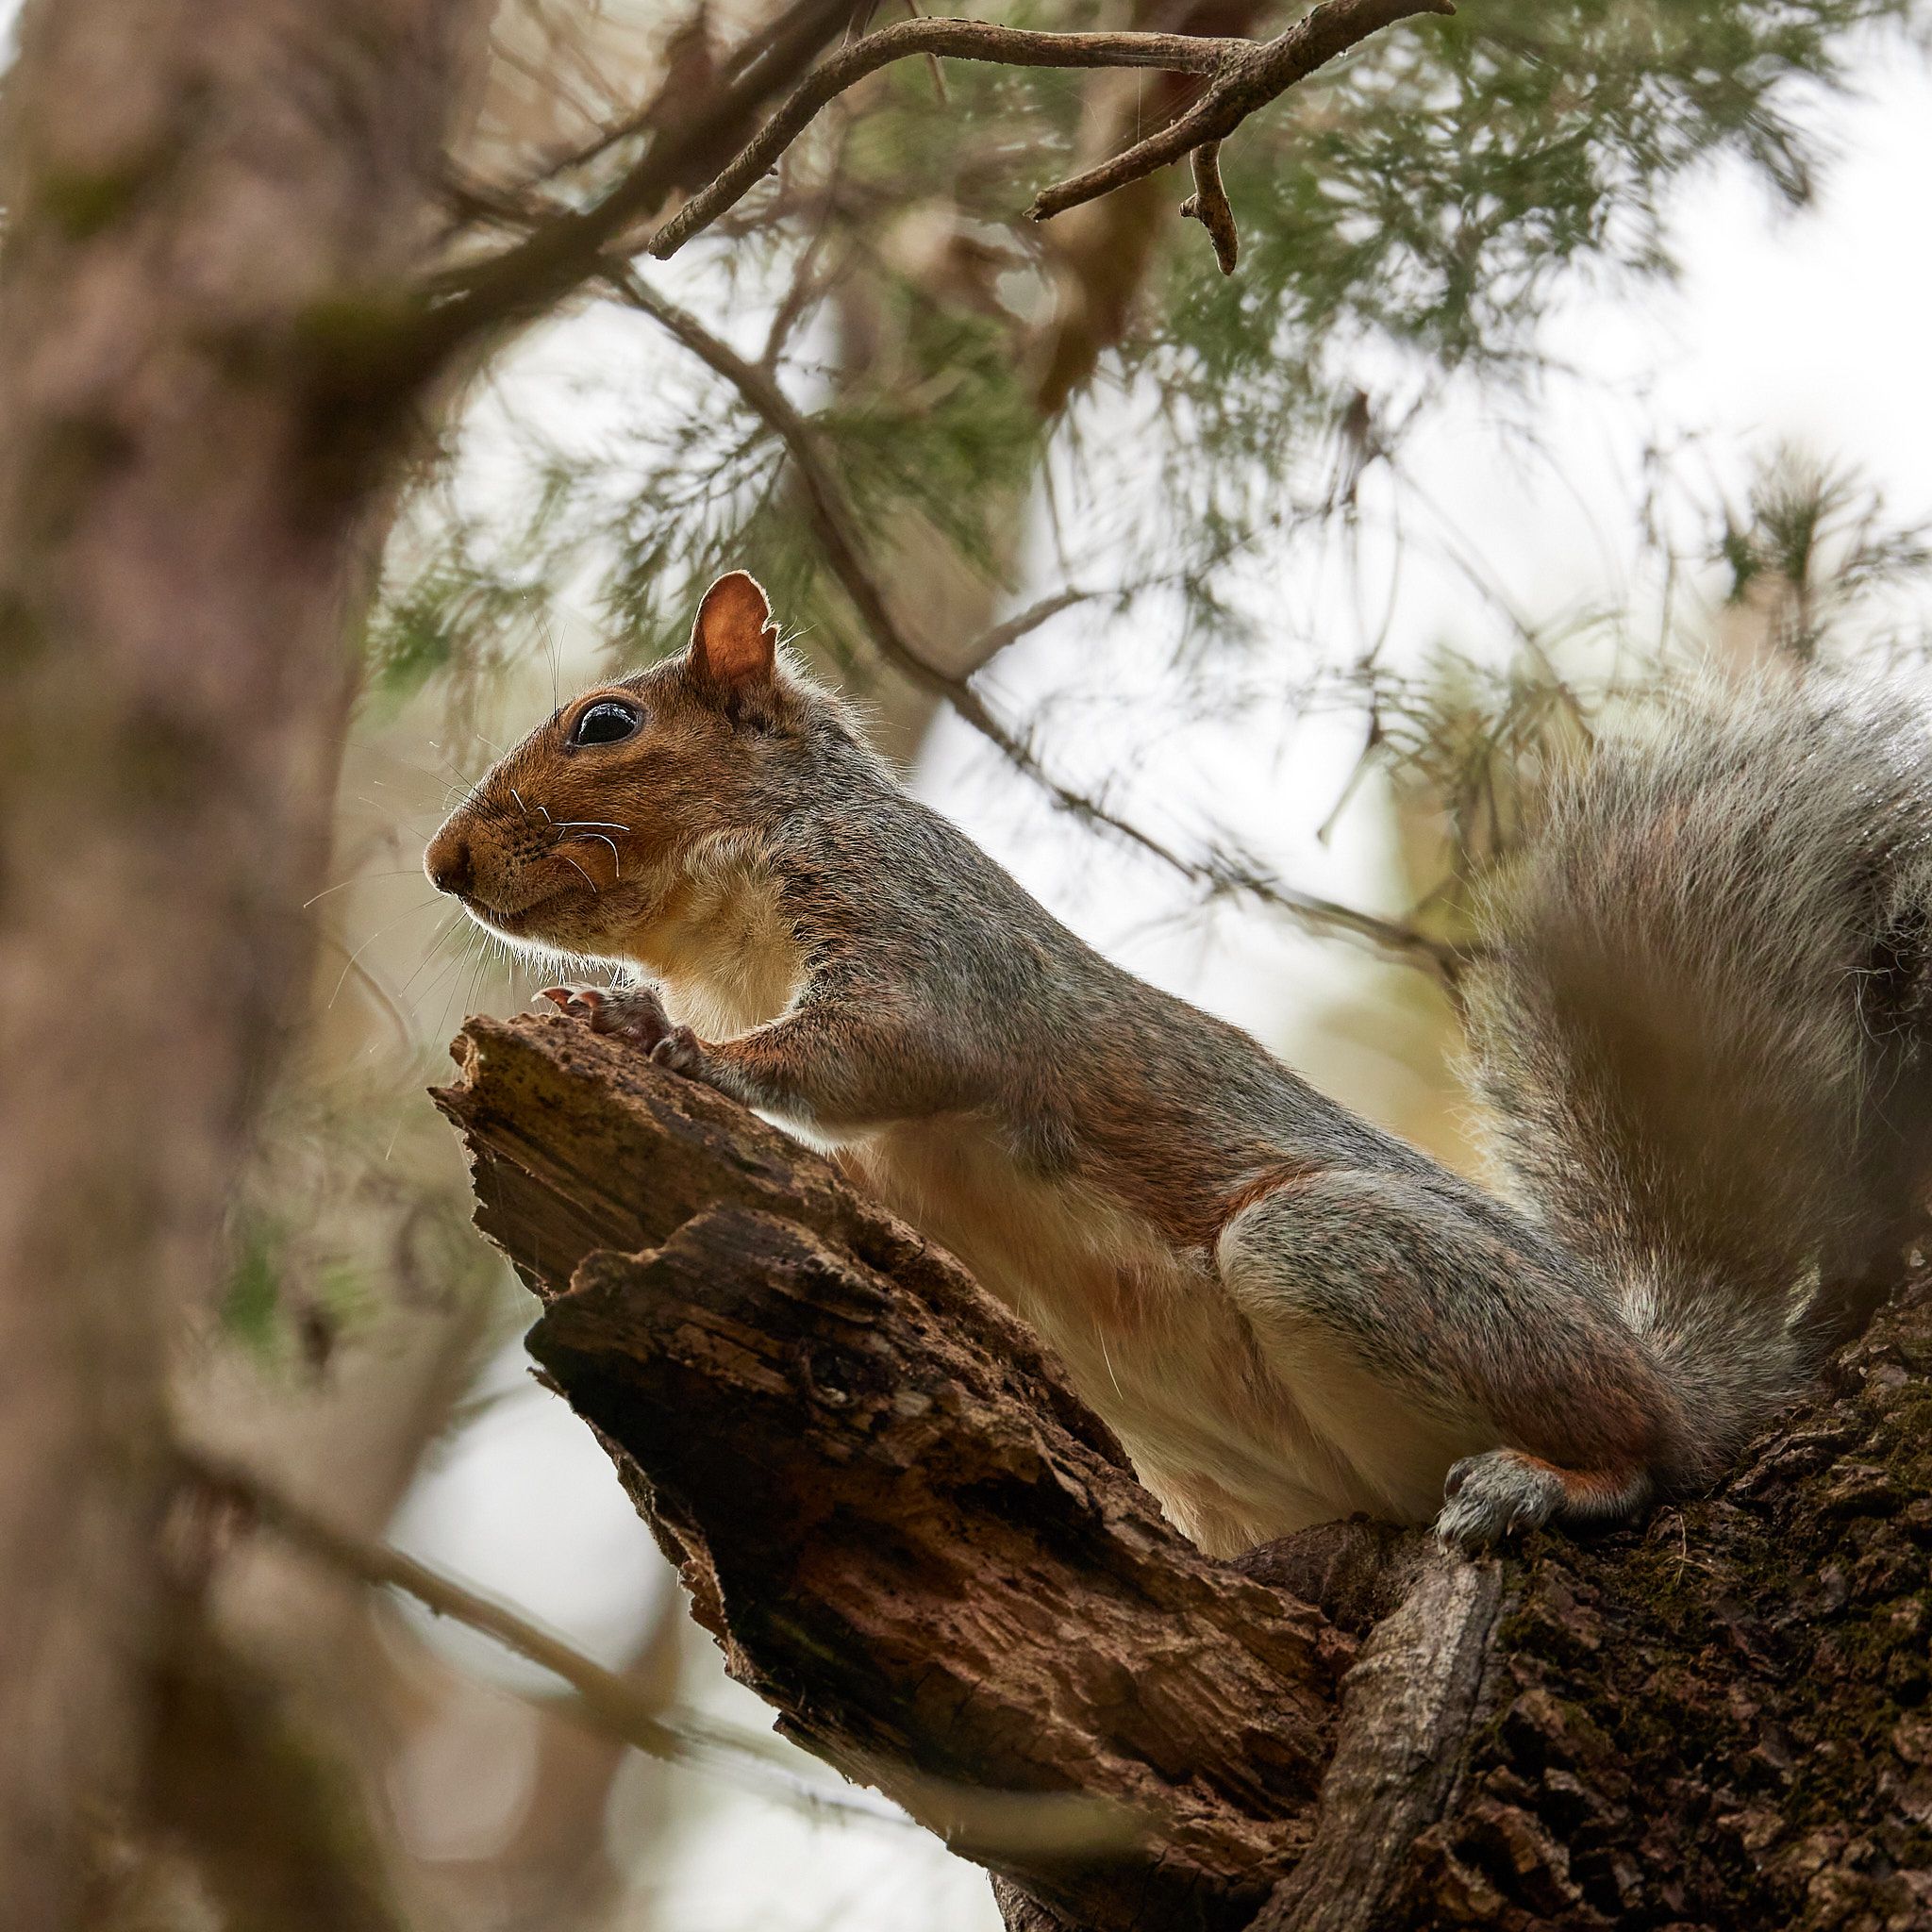 A squirrel looks down on its inferiors.